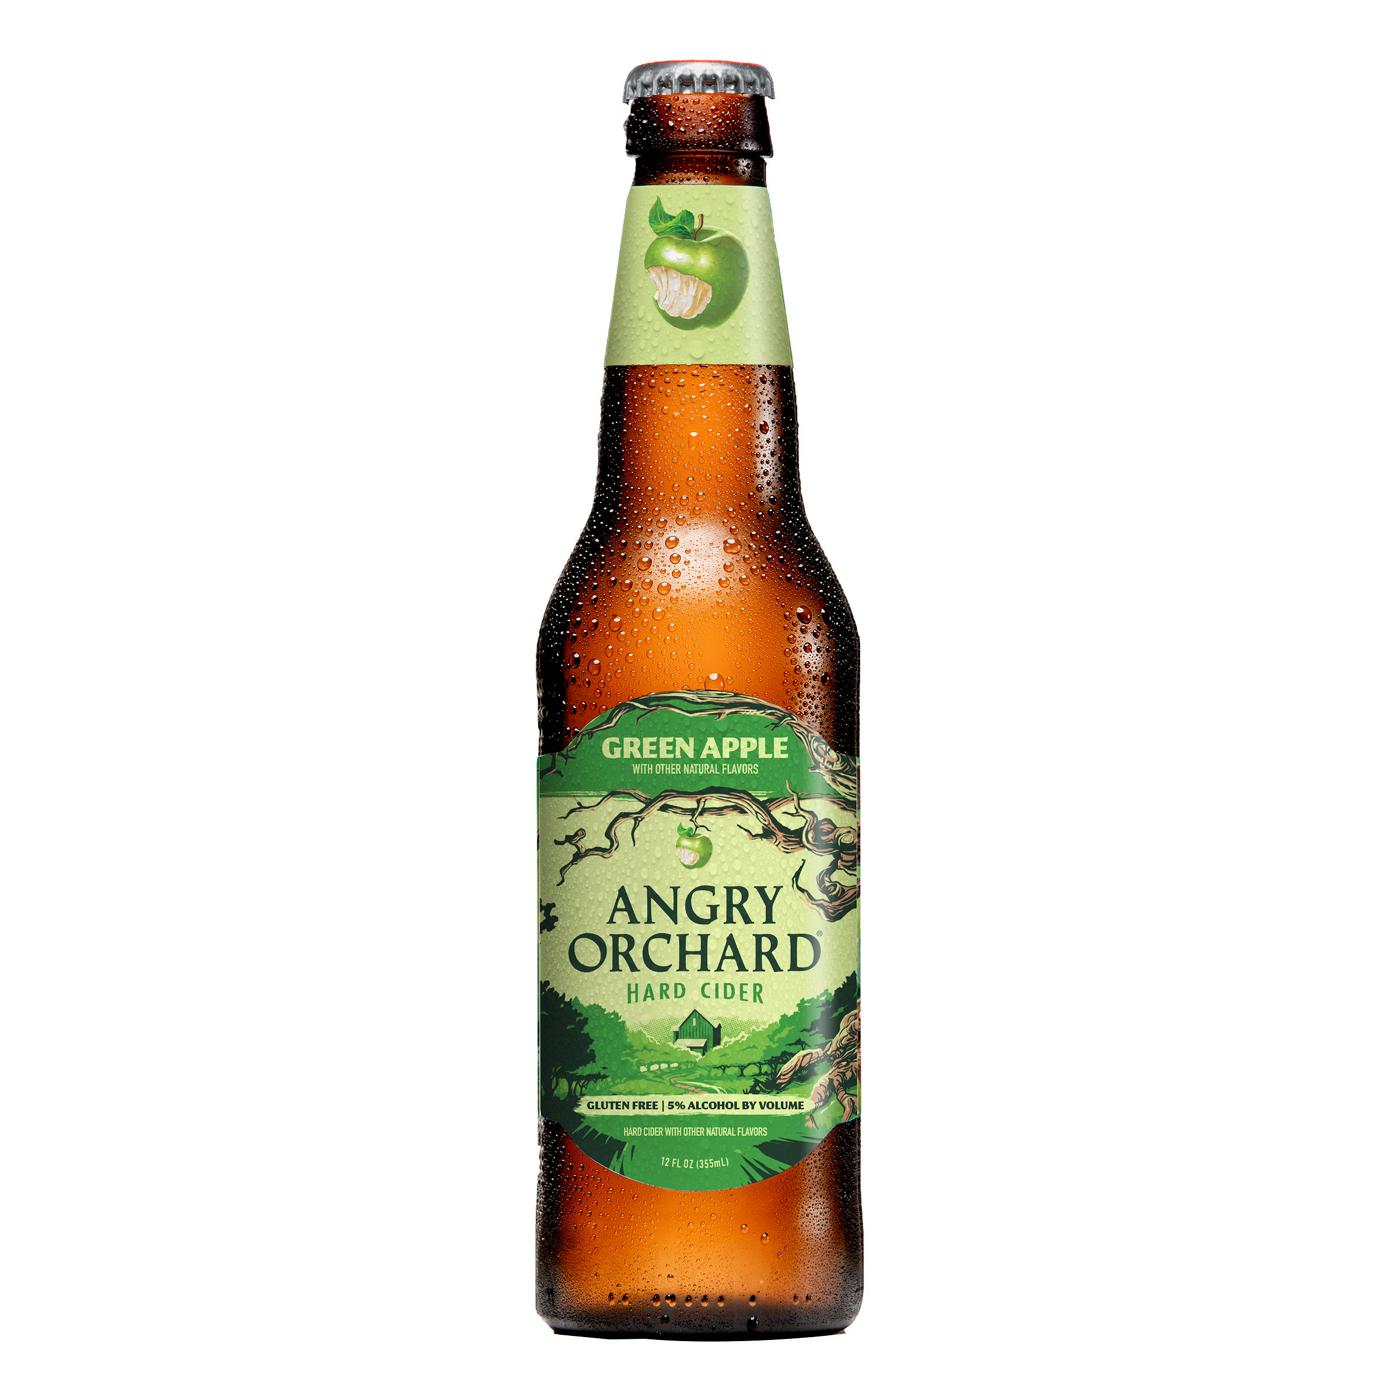 Angry Orchard Green Apple Hard Cider 6 pk Bottles; image 3 of 3